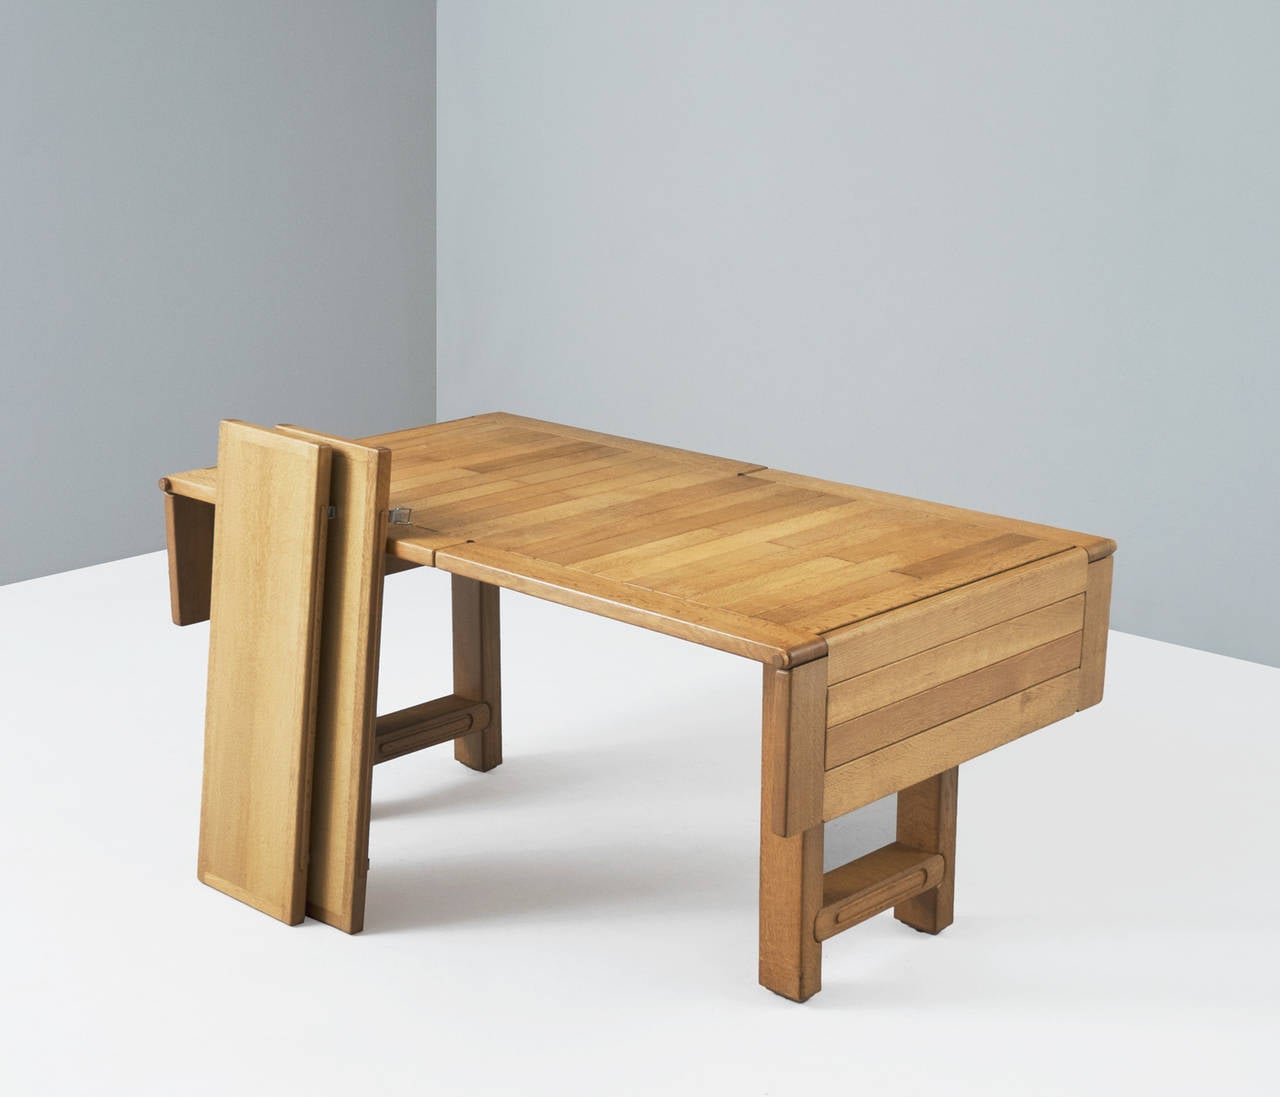 Dining table model 'Bourbonnais', in oak, by Guillerme & Chambron, France 1970s.

The solid frame together with the extendible leaves are in a very good working condition. The leaves are 'hidden' under the top and this table could easily be